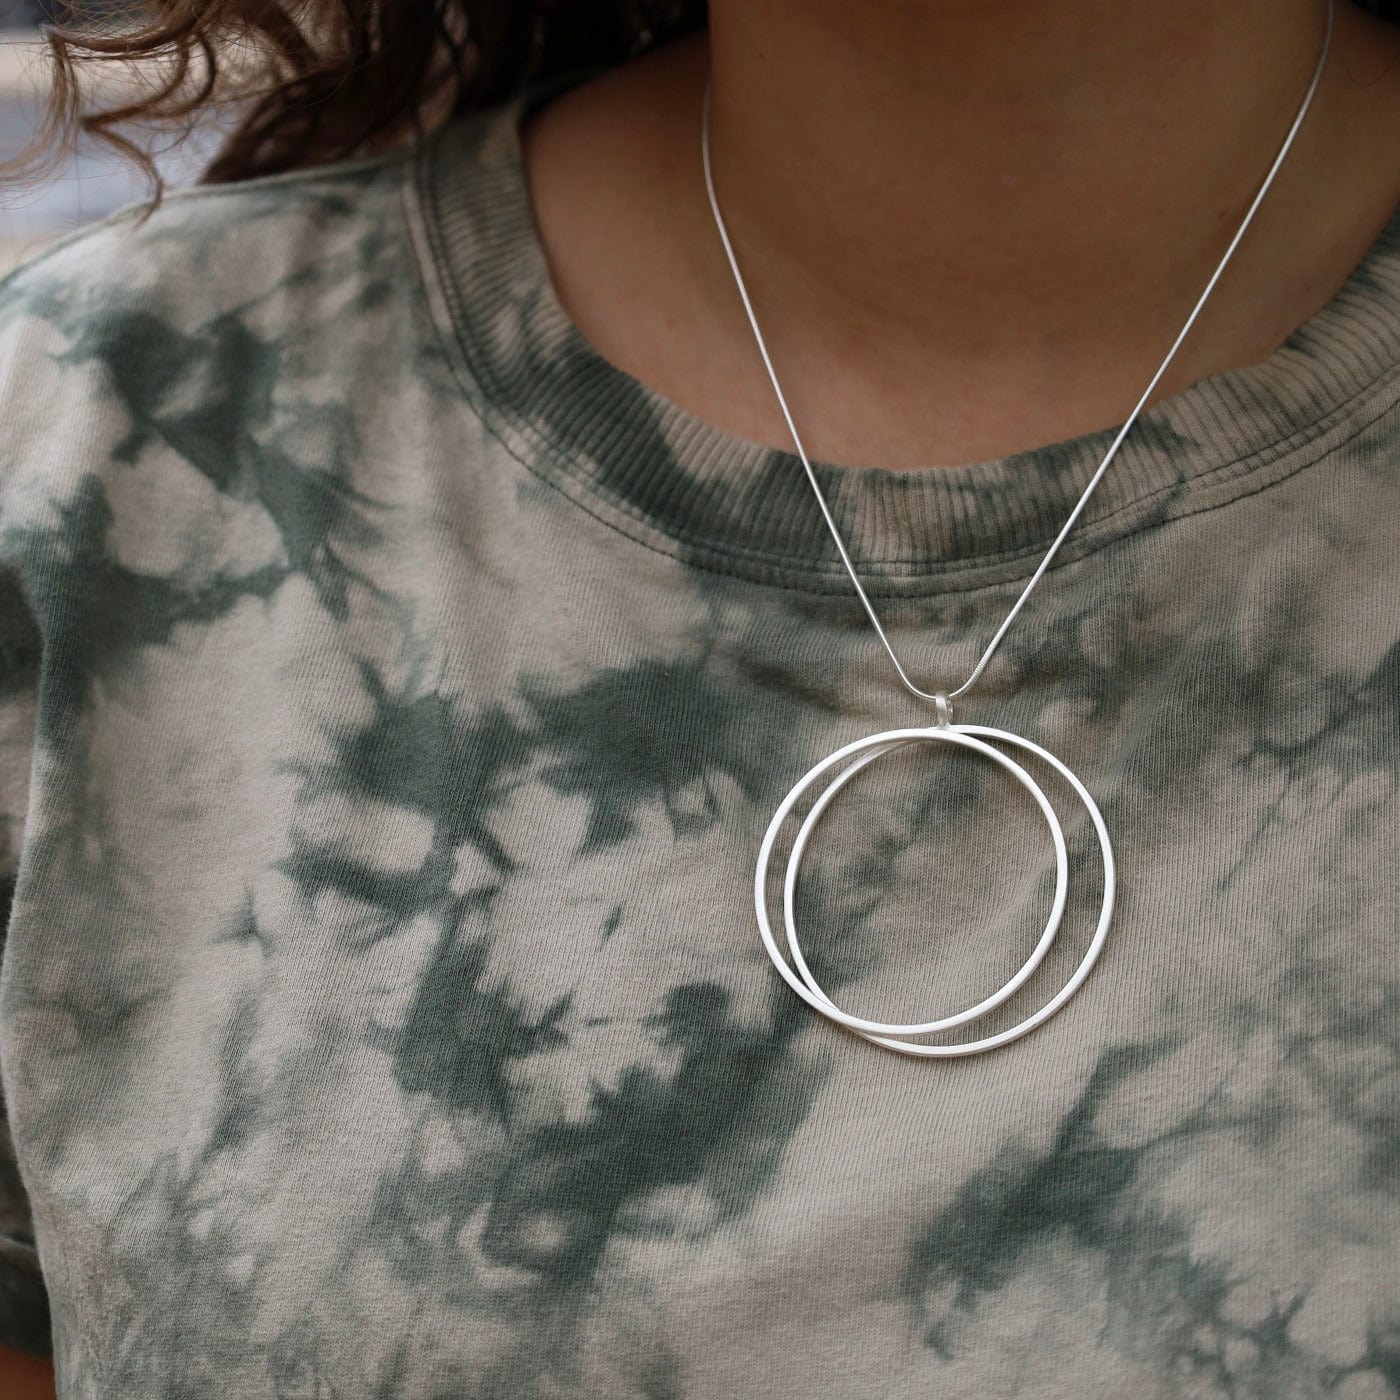 NKL 2 Ring Pendant Necklace